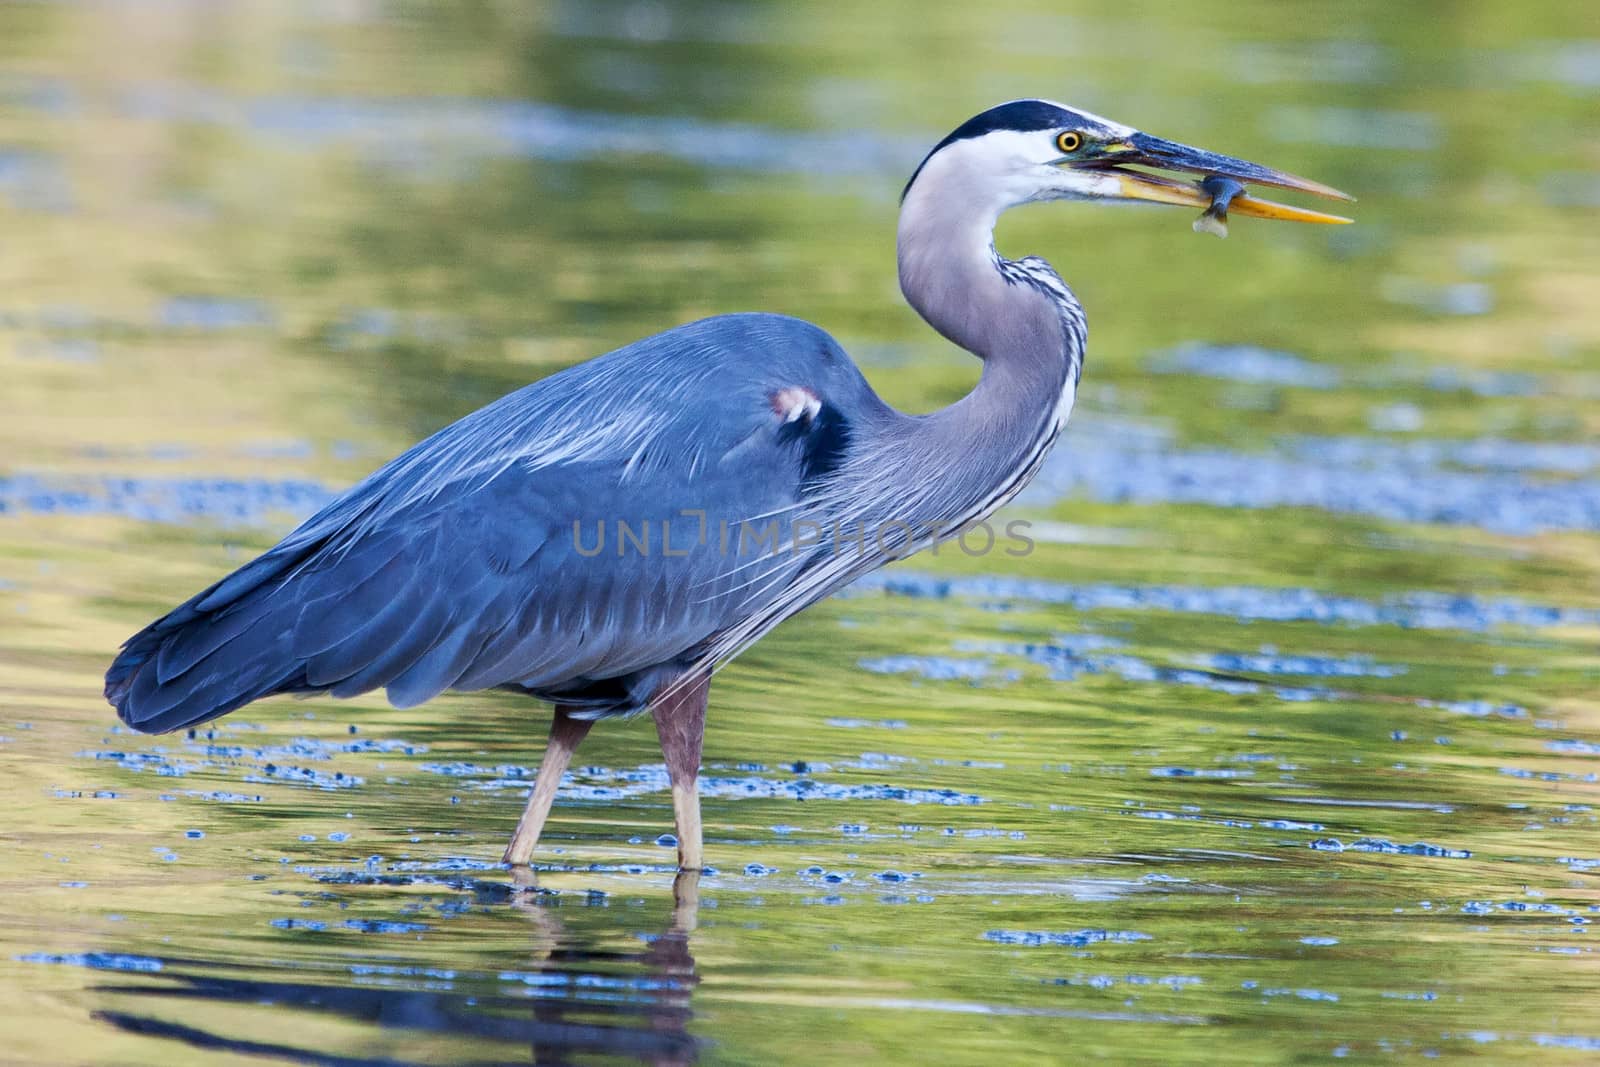 Great Blue Heron catches a small bluegill